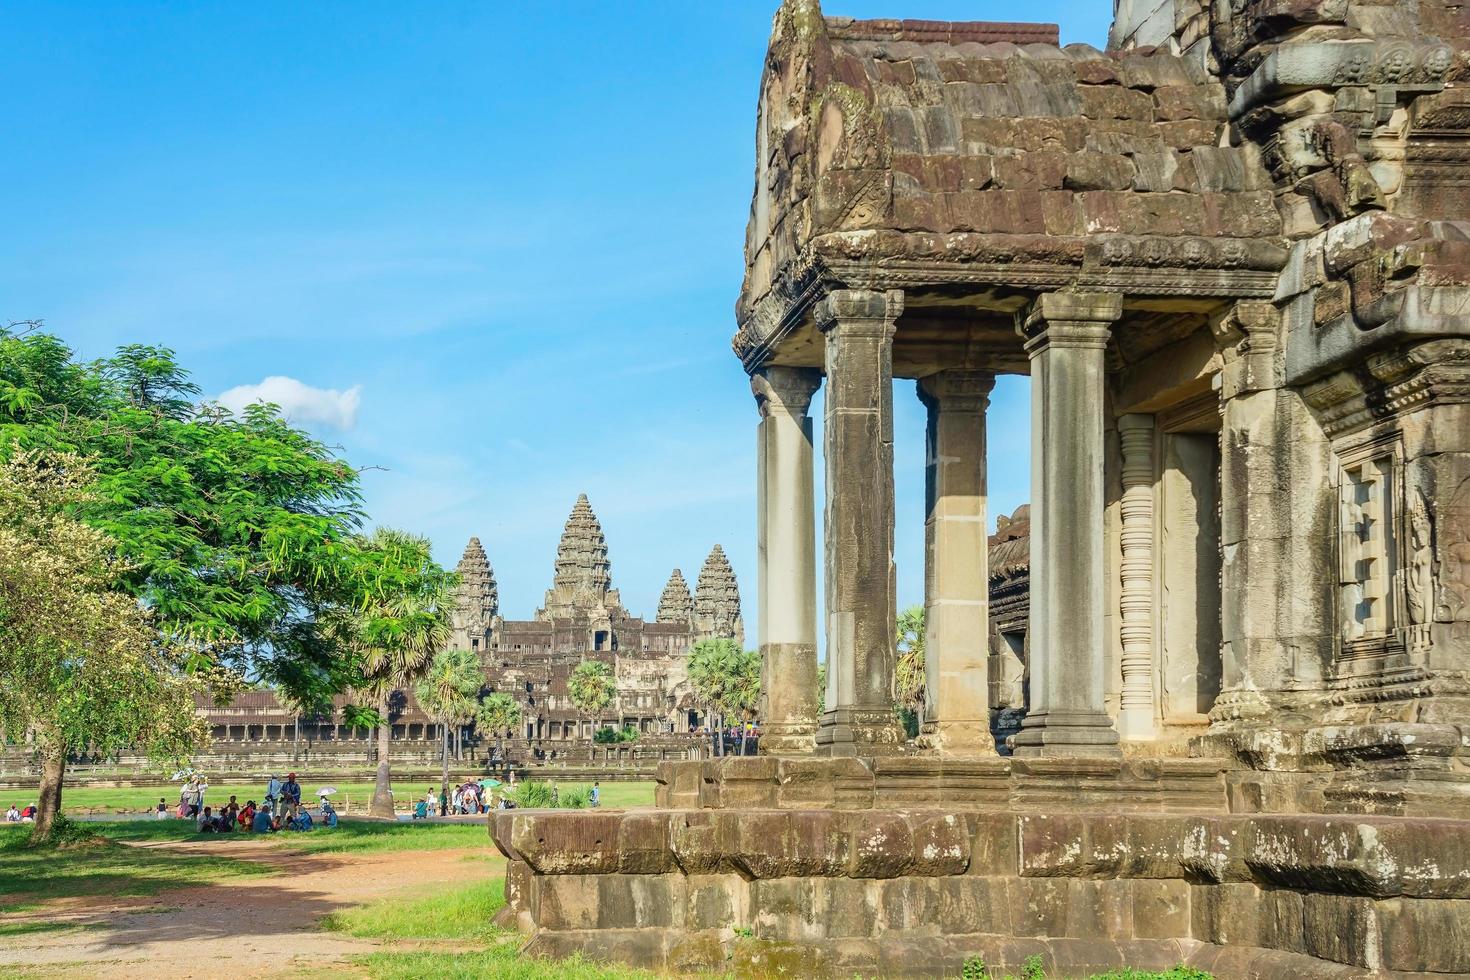 People at the Angkor Wat Temple, Siem Reap, Cambodia photo